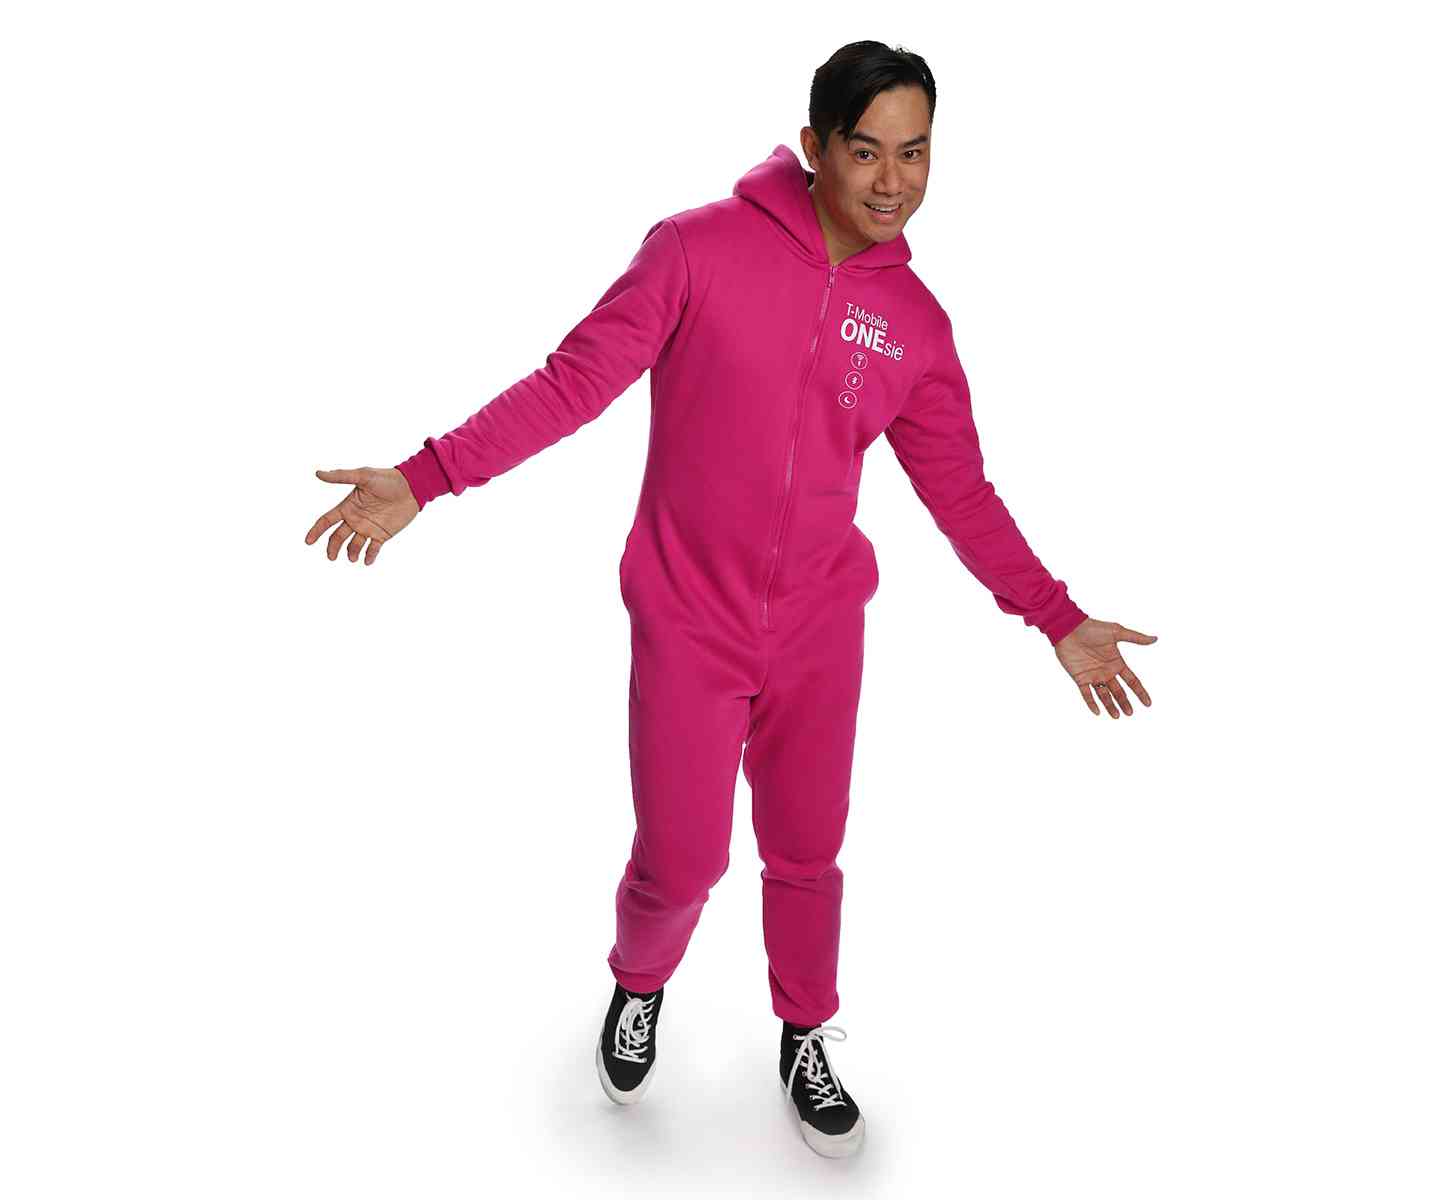 T-Mobile Onesie official April Fools' Day 2017